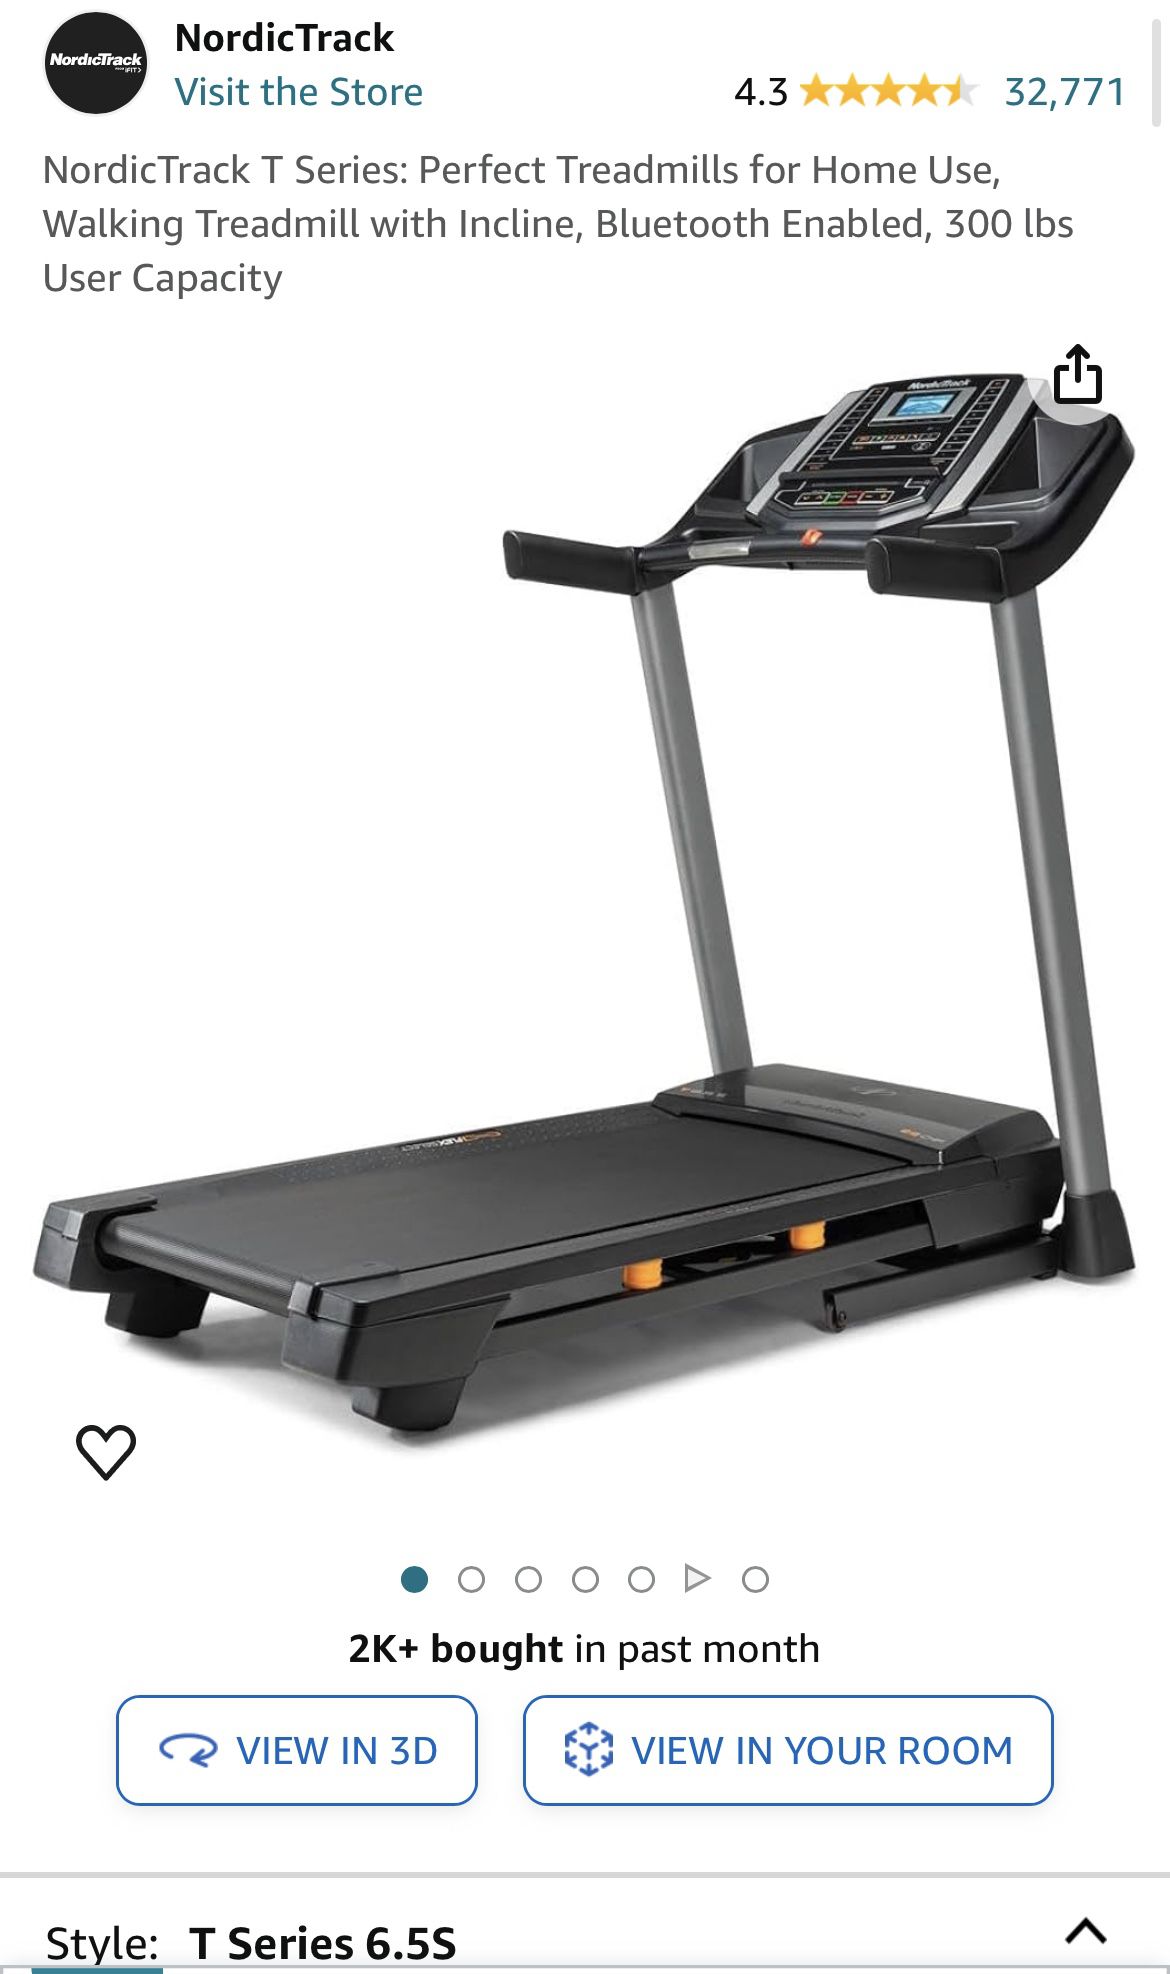 NordicTrack T Series: Perfect Treadmills for Home Use, Walking Treadmill with Incline, Bluetooth Enabled, 300 lbs User Capacity